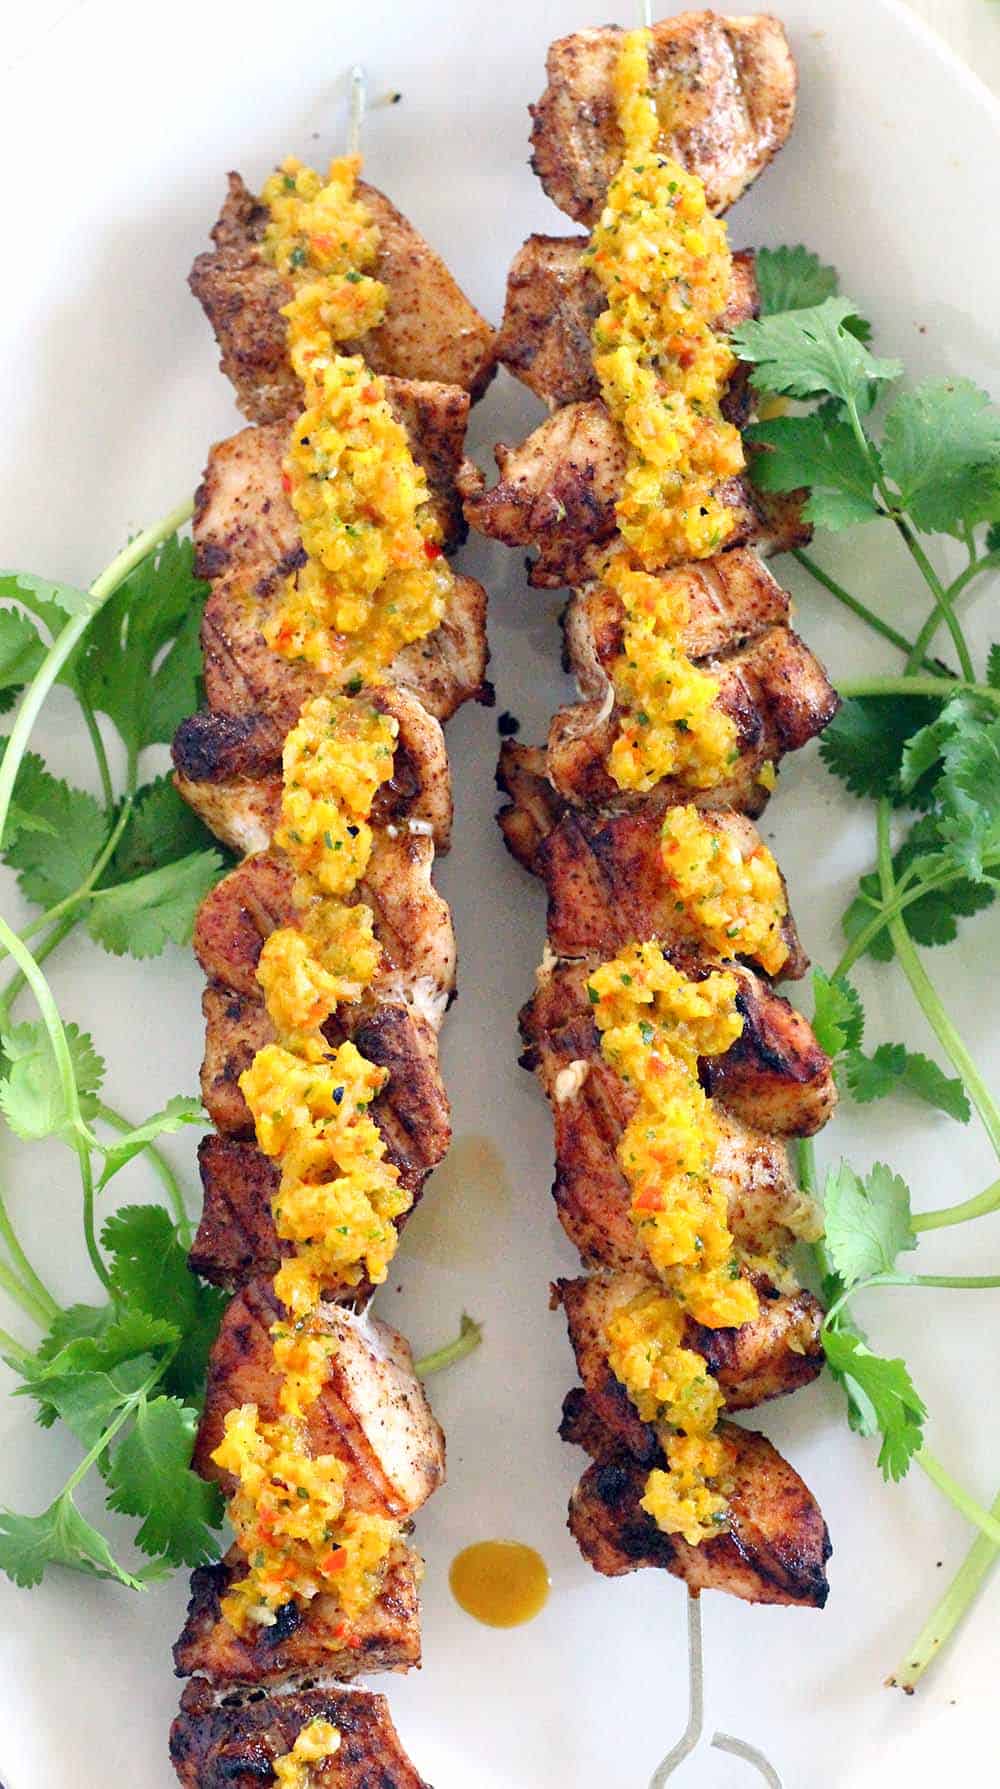 These Grilled Chicken Skewers and are DELICIOUS paired with charred Sweet Pepper Relish! Paleo, low-carb, and gluten-free. Everything cooks on the grill- use any extra relish for hot dogs at your next summer cookout.